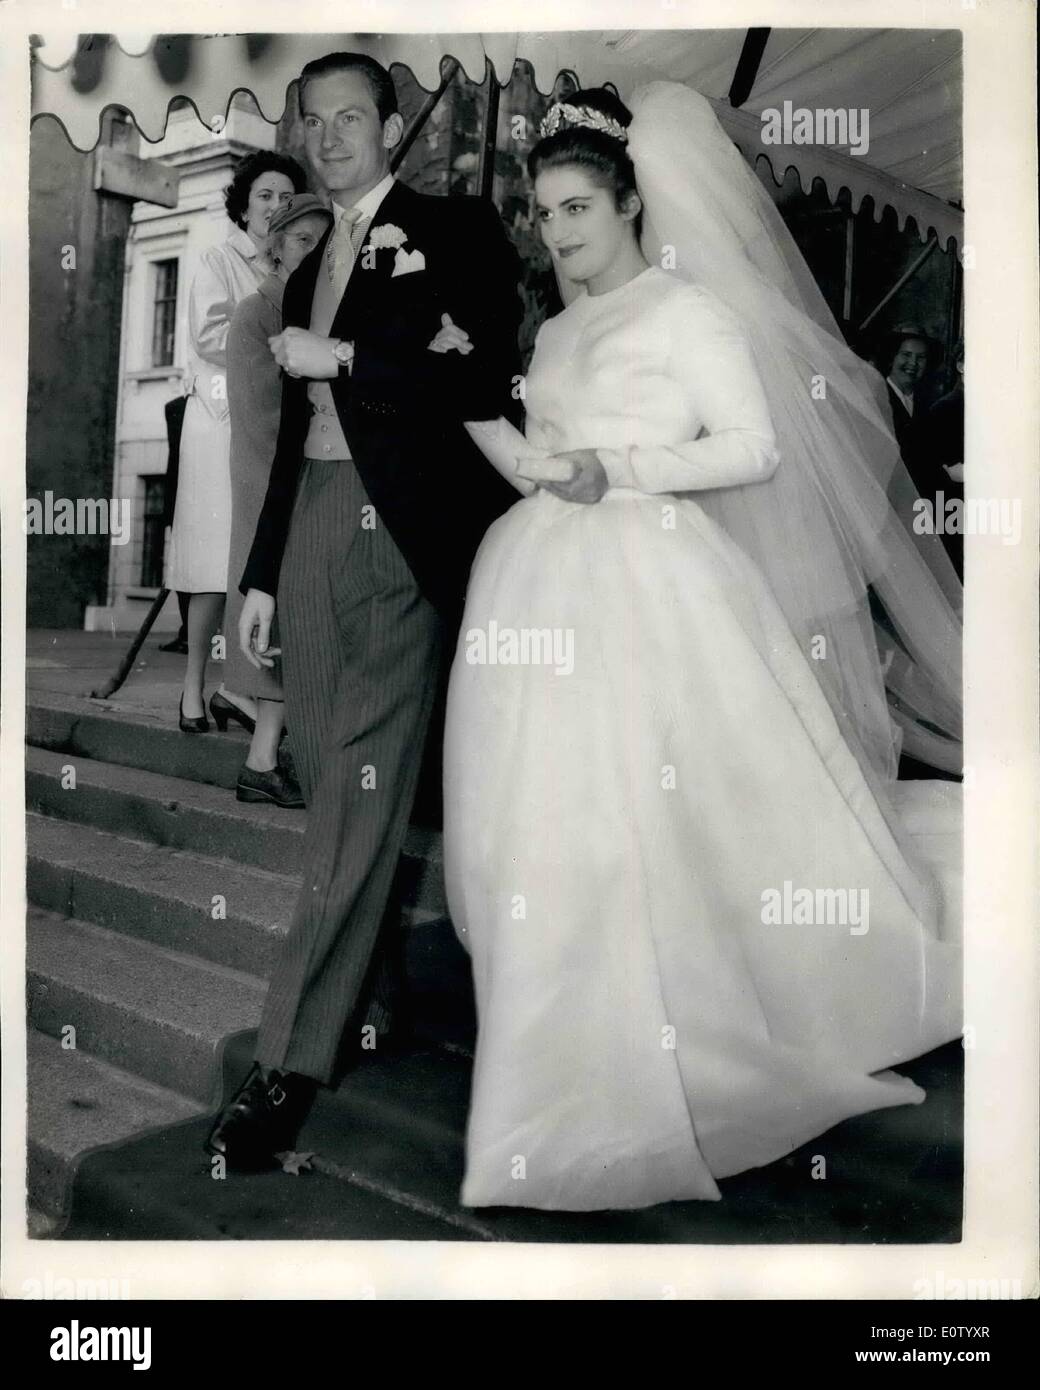 Oct. 10, 1960 - Daughter of Douglas Fairbanks weds: The wedding took place this afternoon at the Guards Chapel - of Miss Daphne Stock Photo